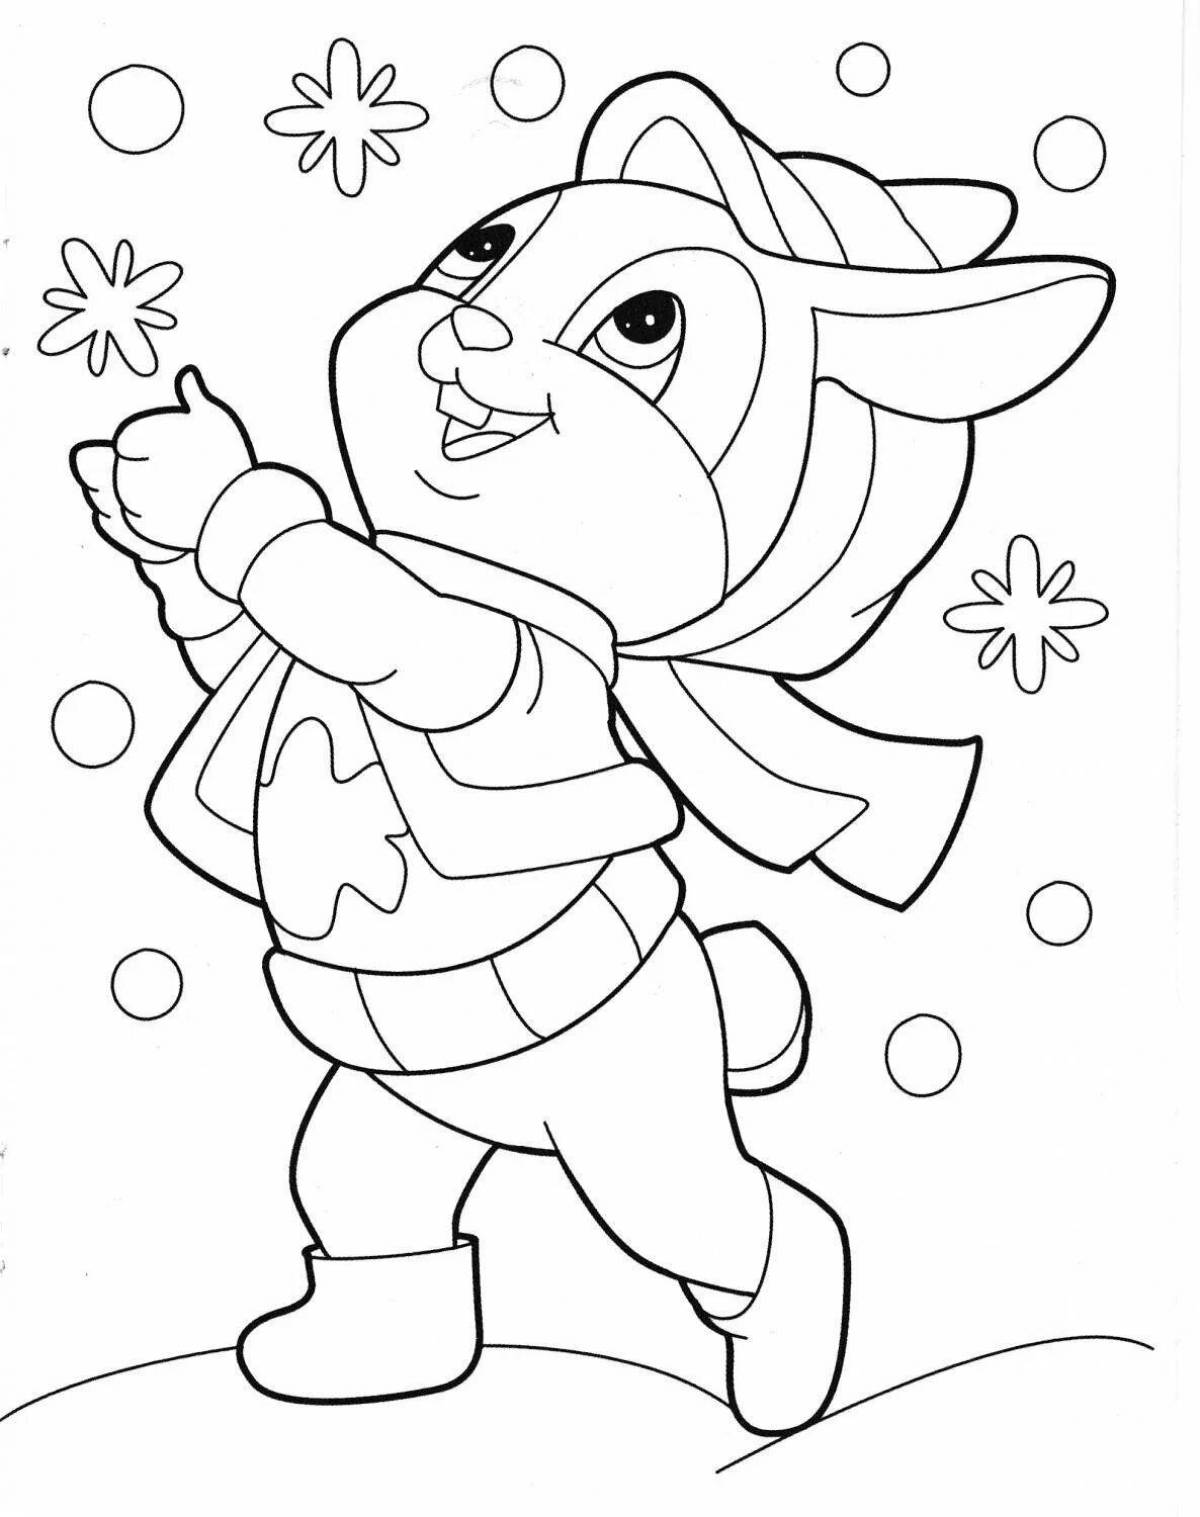 Whimsical winter rabbit coloring book